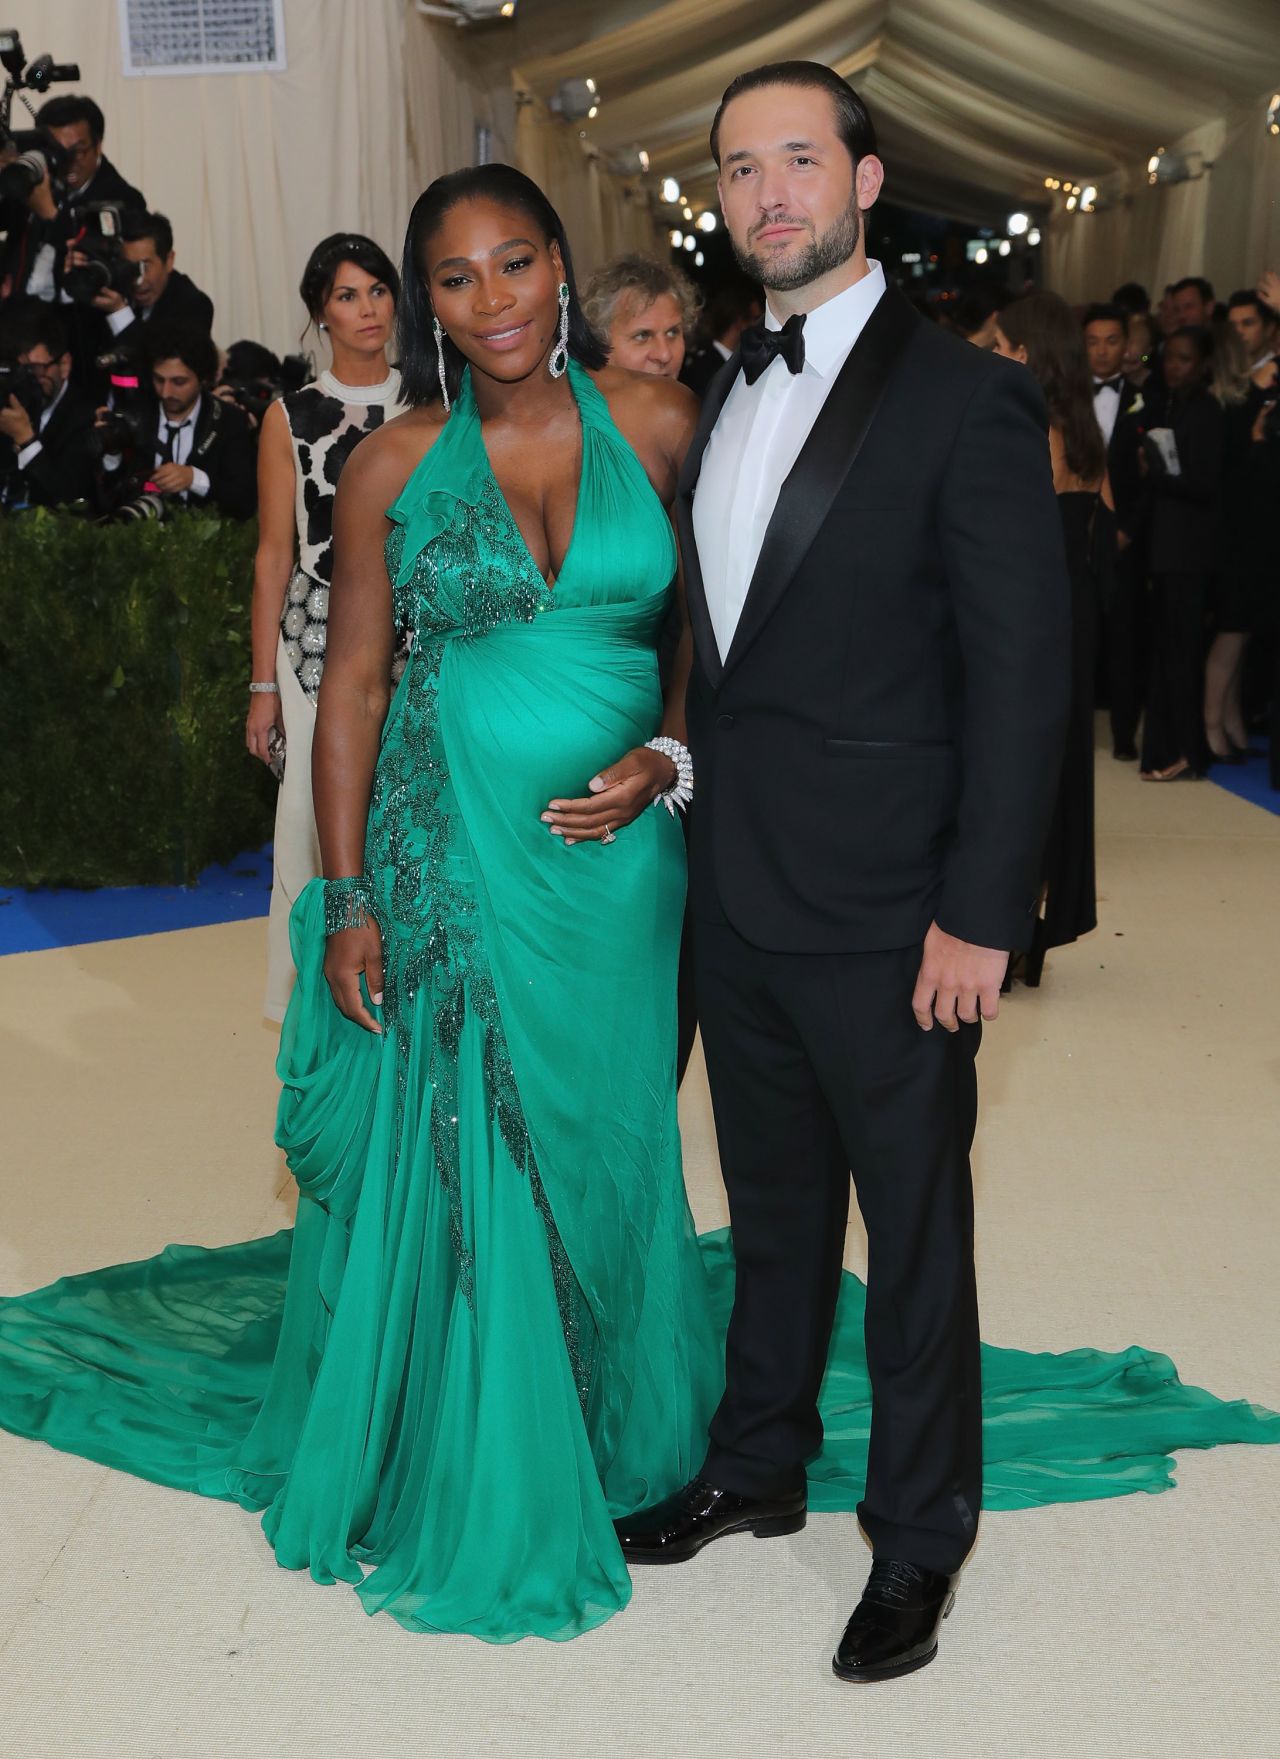 But her achievements in Melbourne Park were made all the more remarkable when the tennis great announced in April that she and fiancee Alexis Ohanian (right) were expecting their first child "this fall."